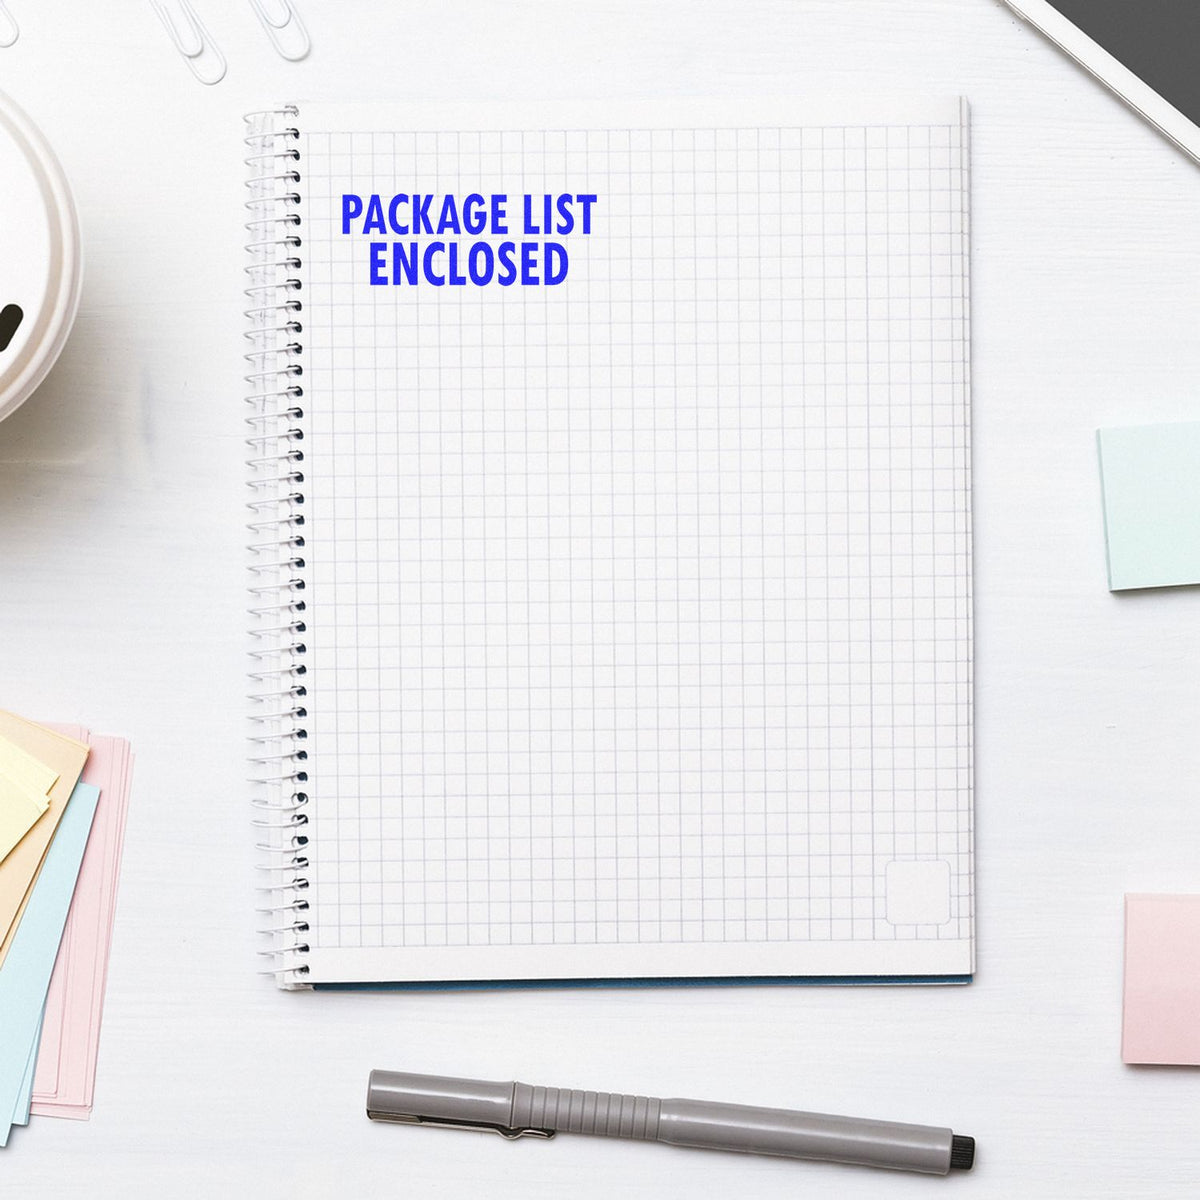 Package List Enclosed Rubber Stamp In Use Photo